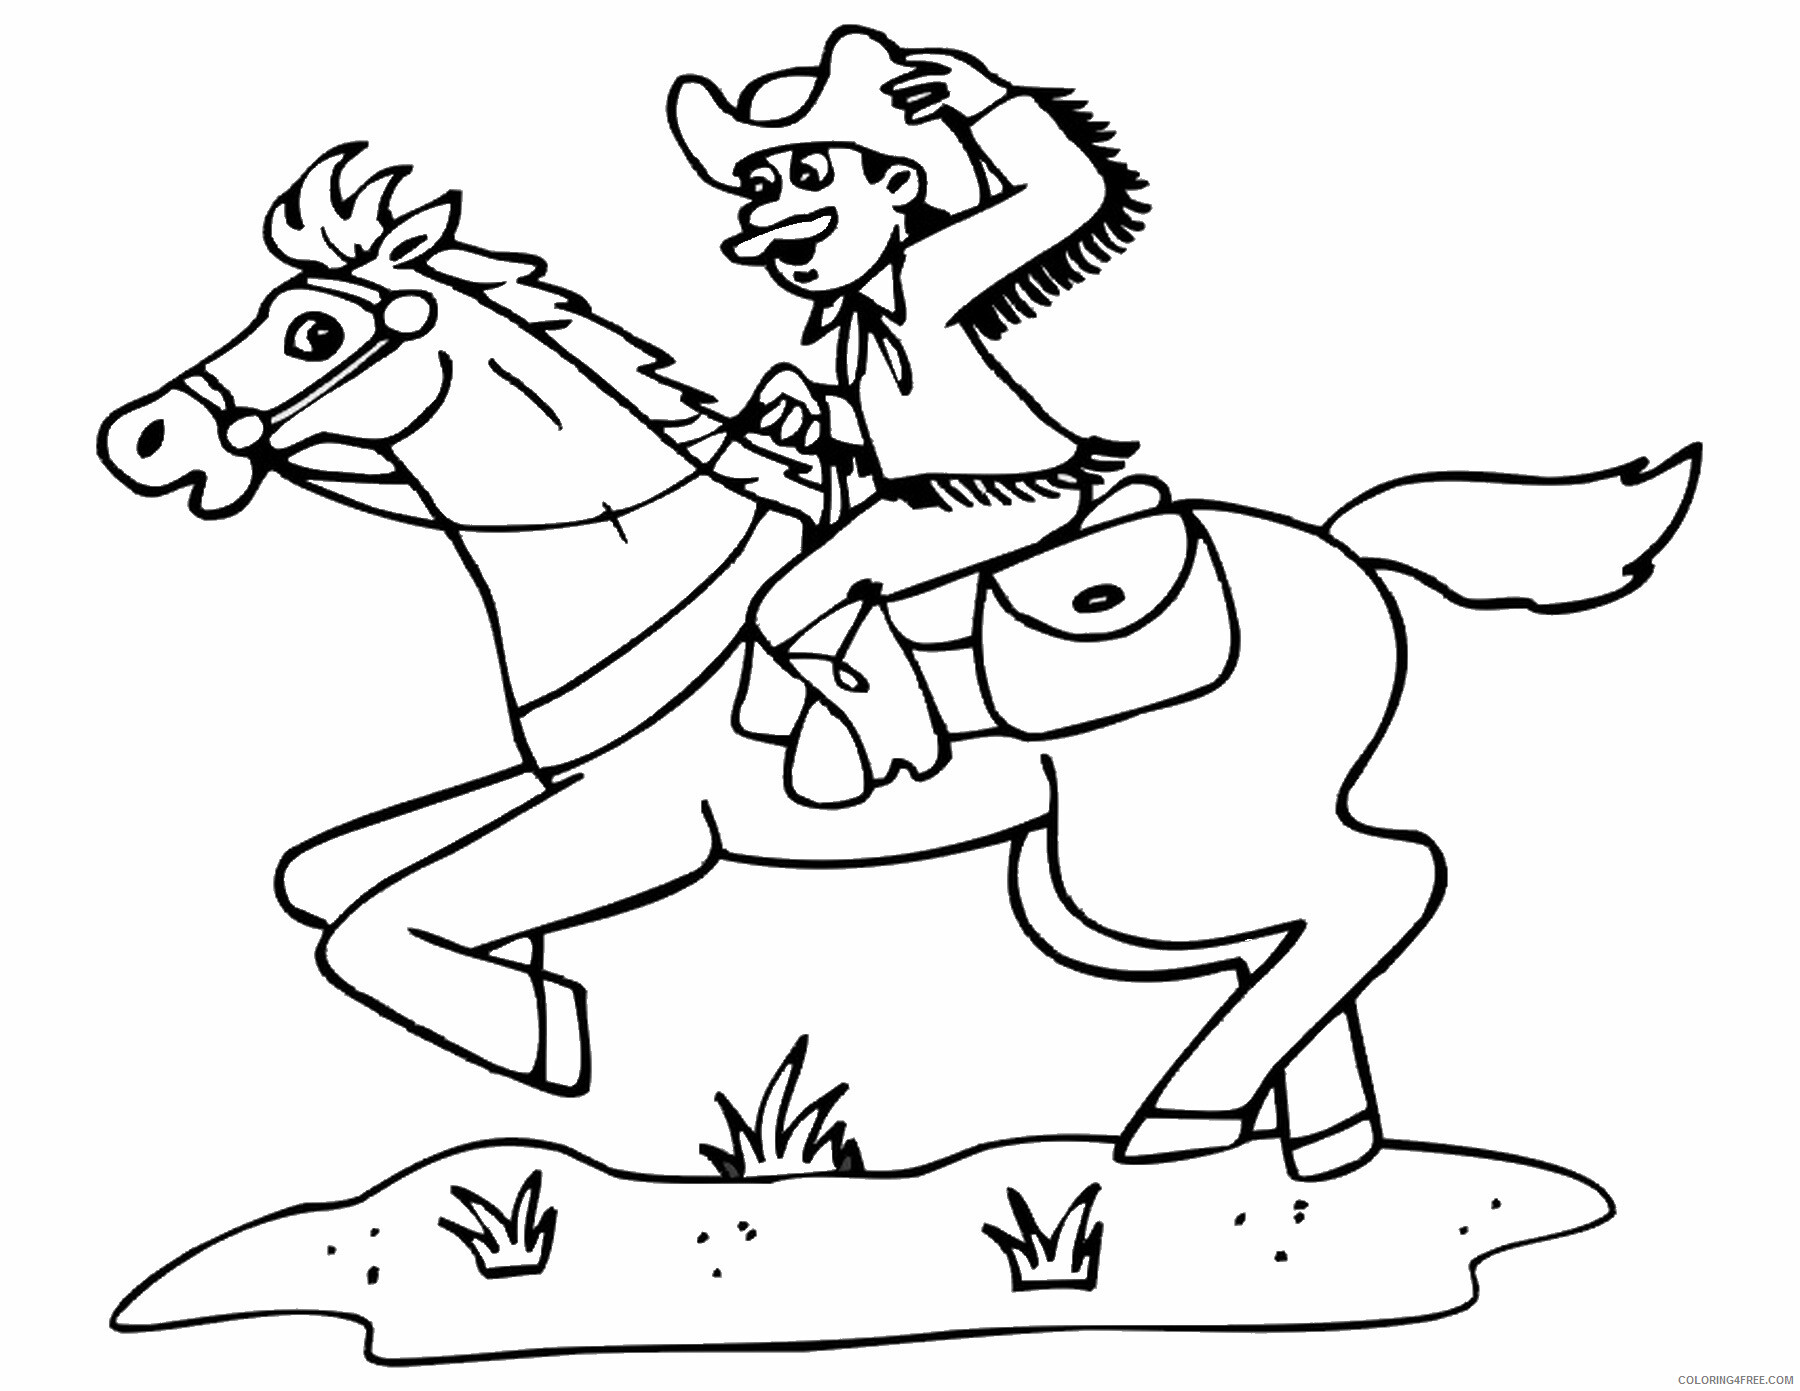 Cowboy Coloring Pages for boys cowboy_05 Printable 2020 0183 Coloring4free